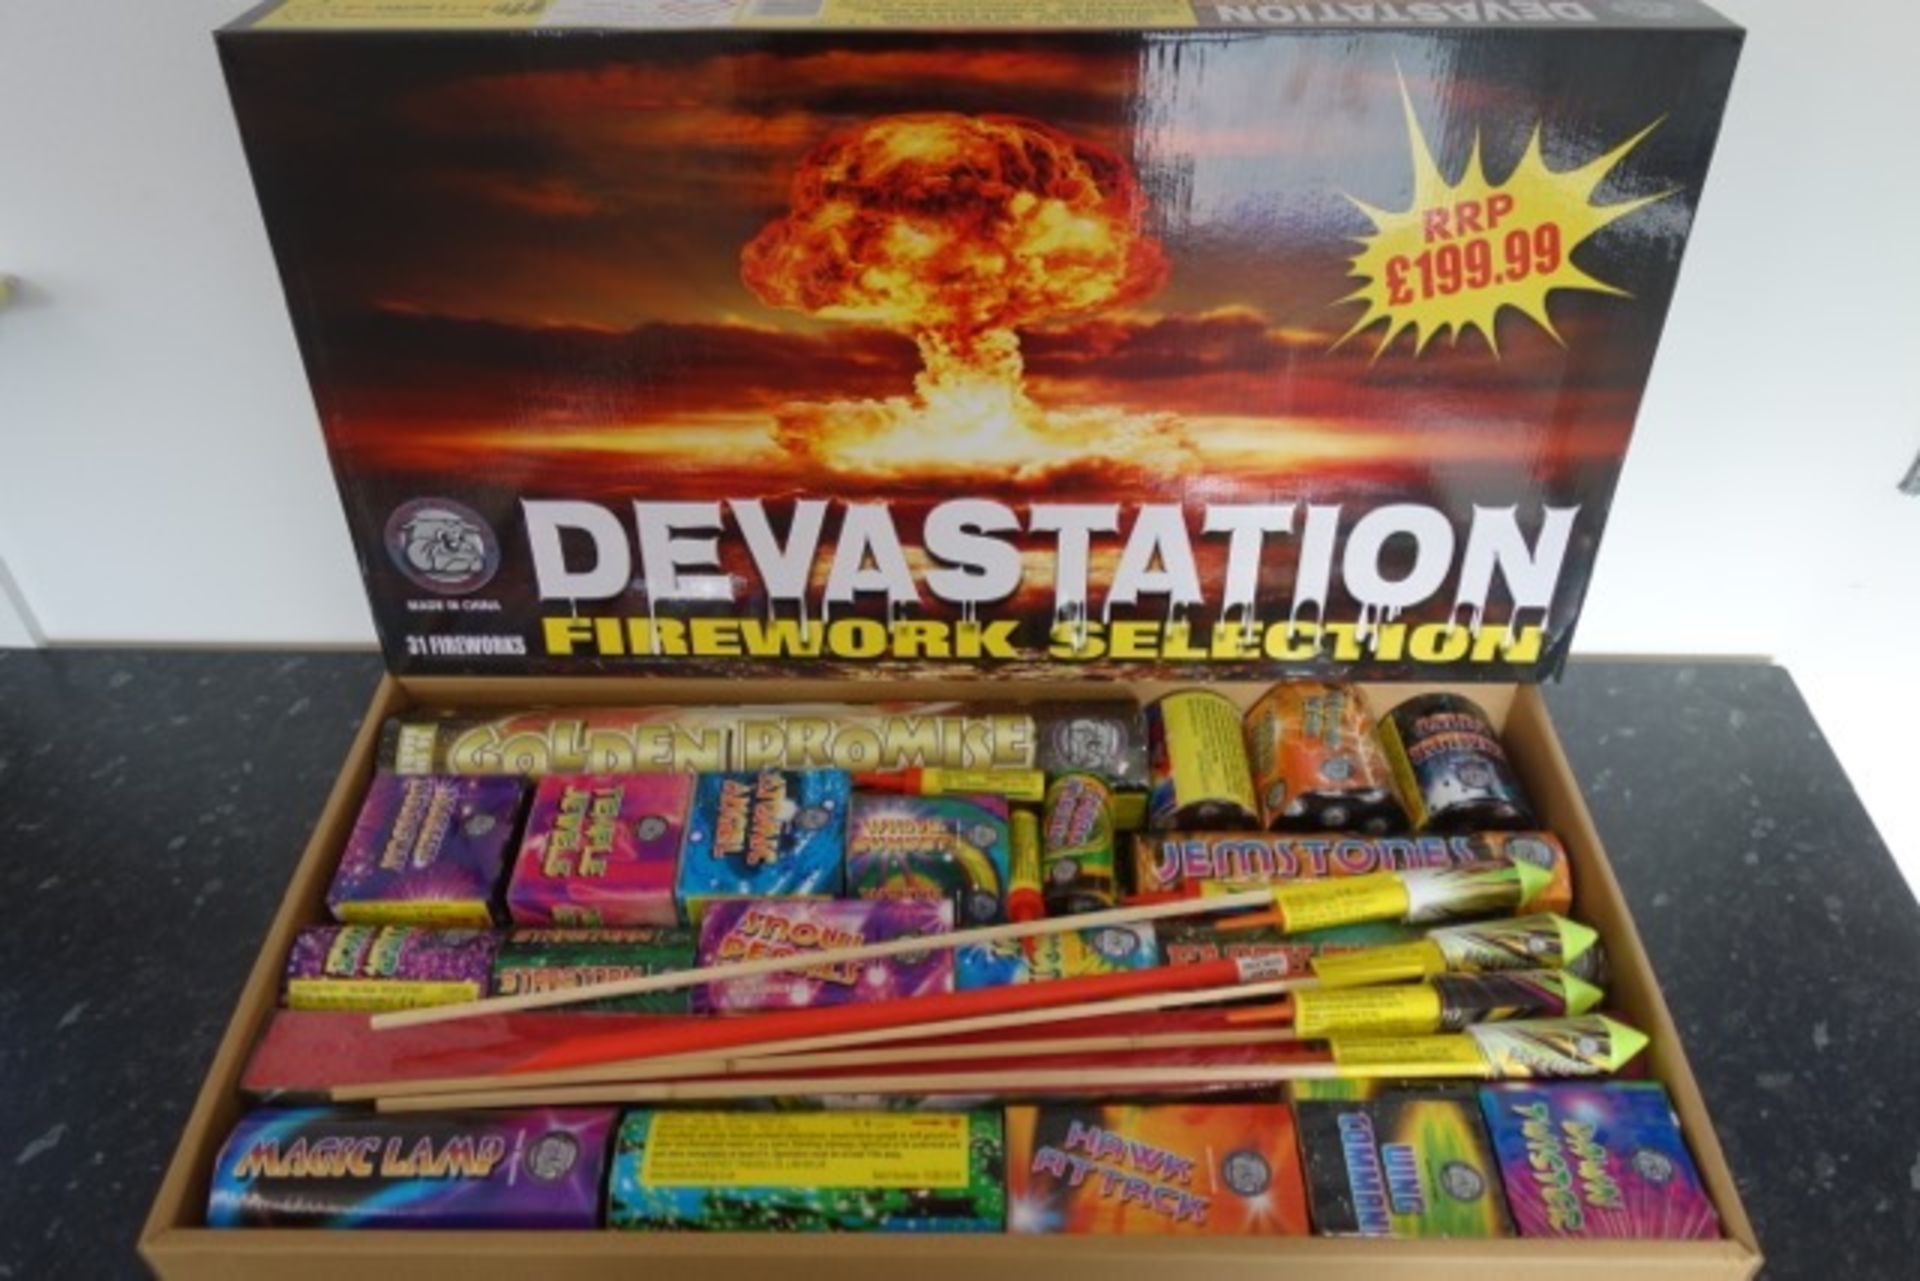 1 x DEVASTATION ULTIMATE SELECTION BOX BY BRITISH BULLDOG FIREWORK COMPANY - THIS YEARS NEW LOOK